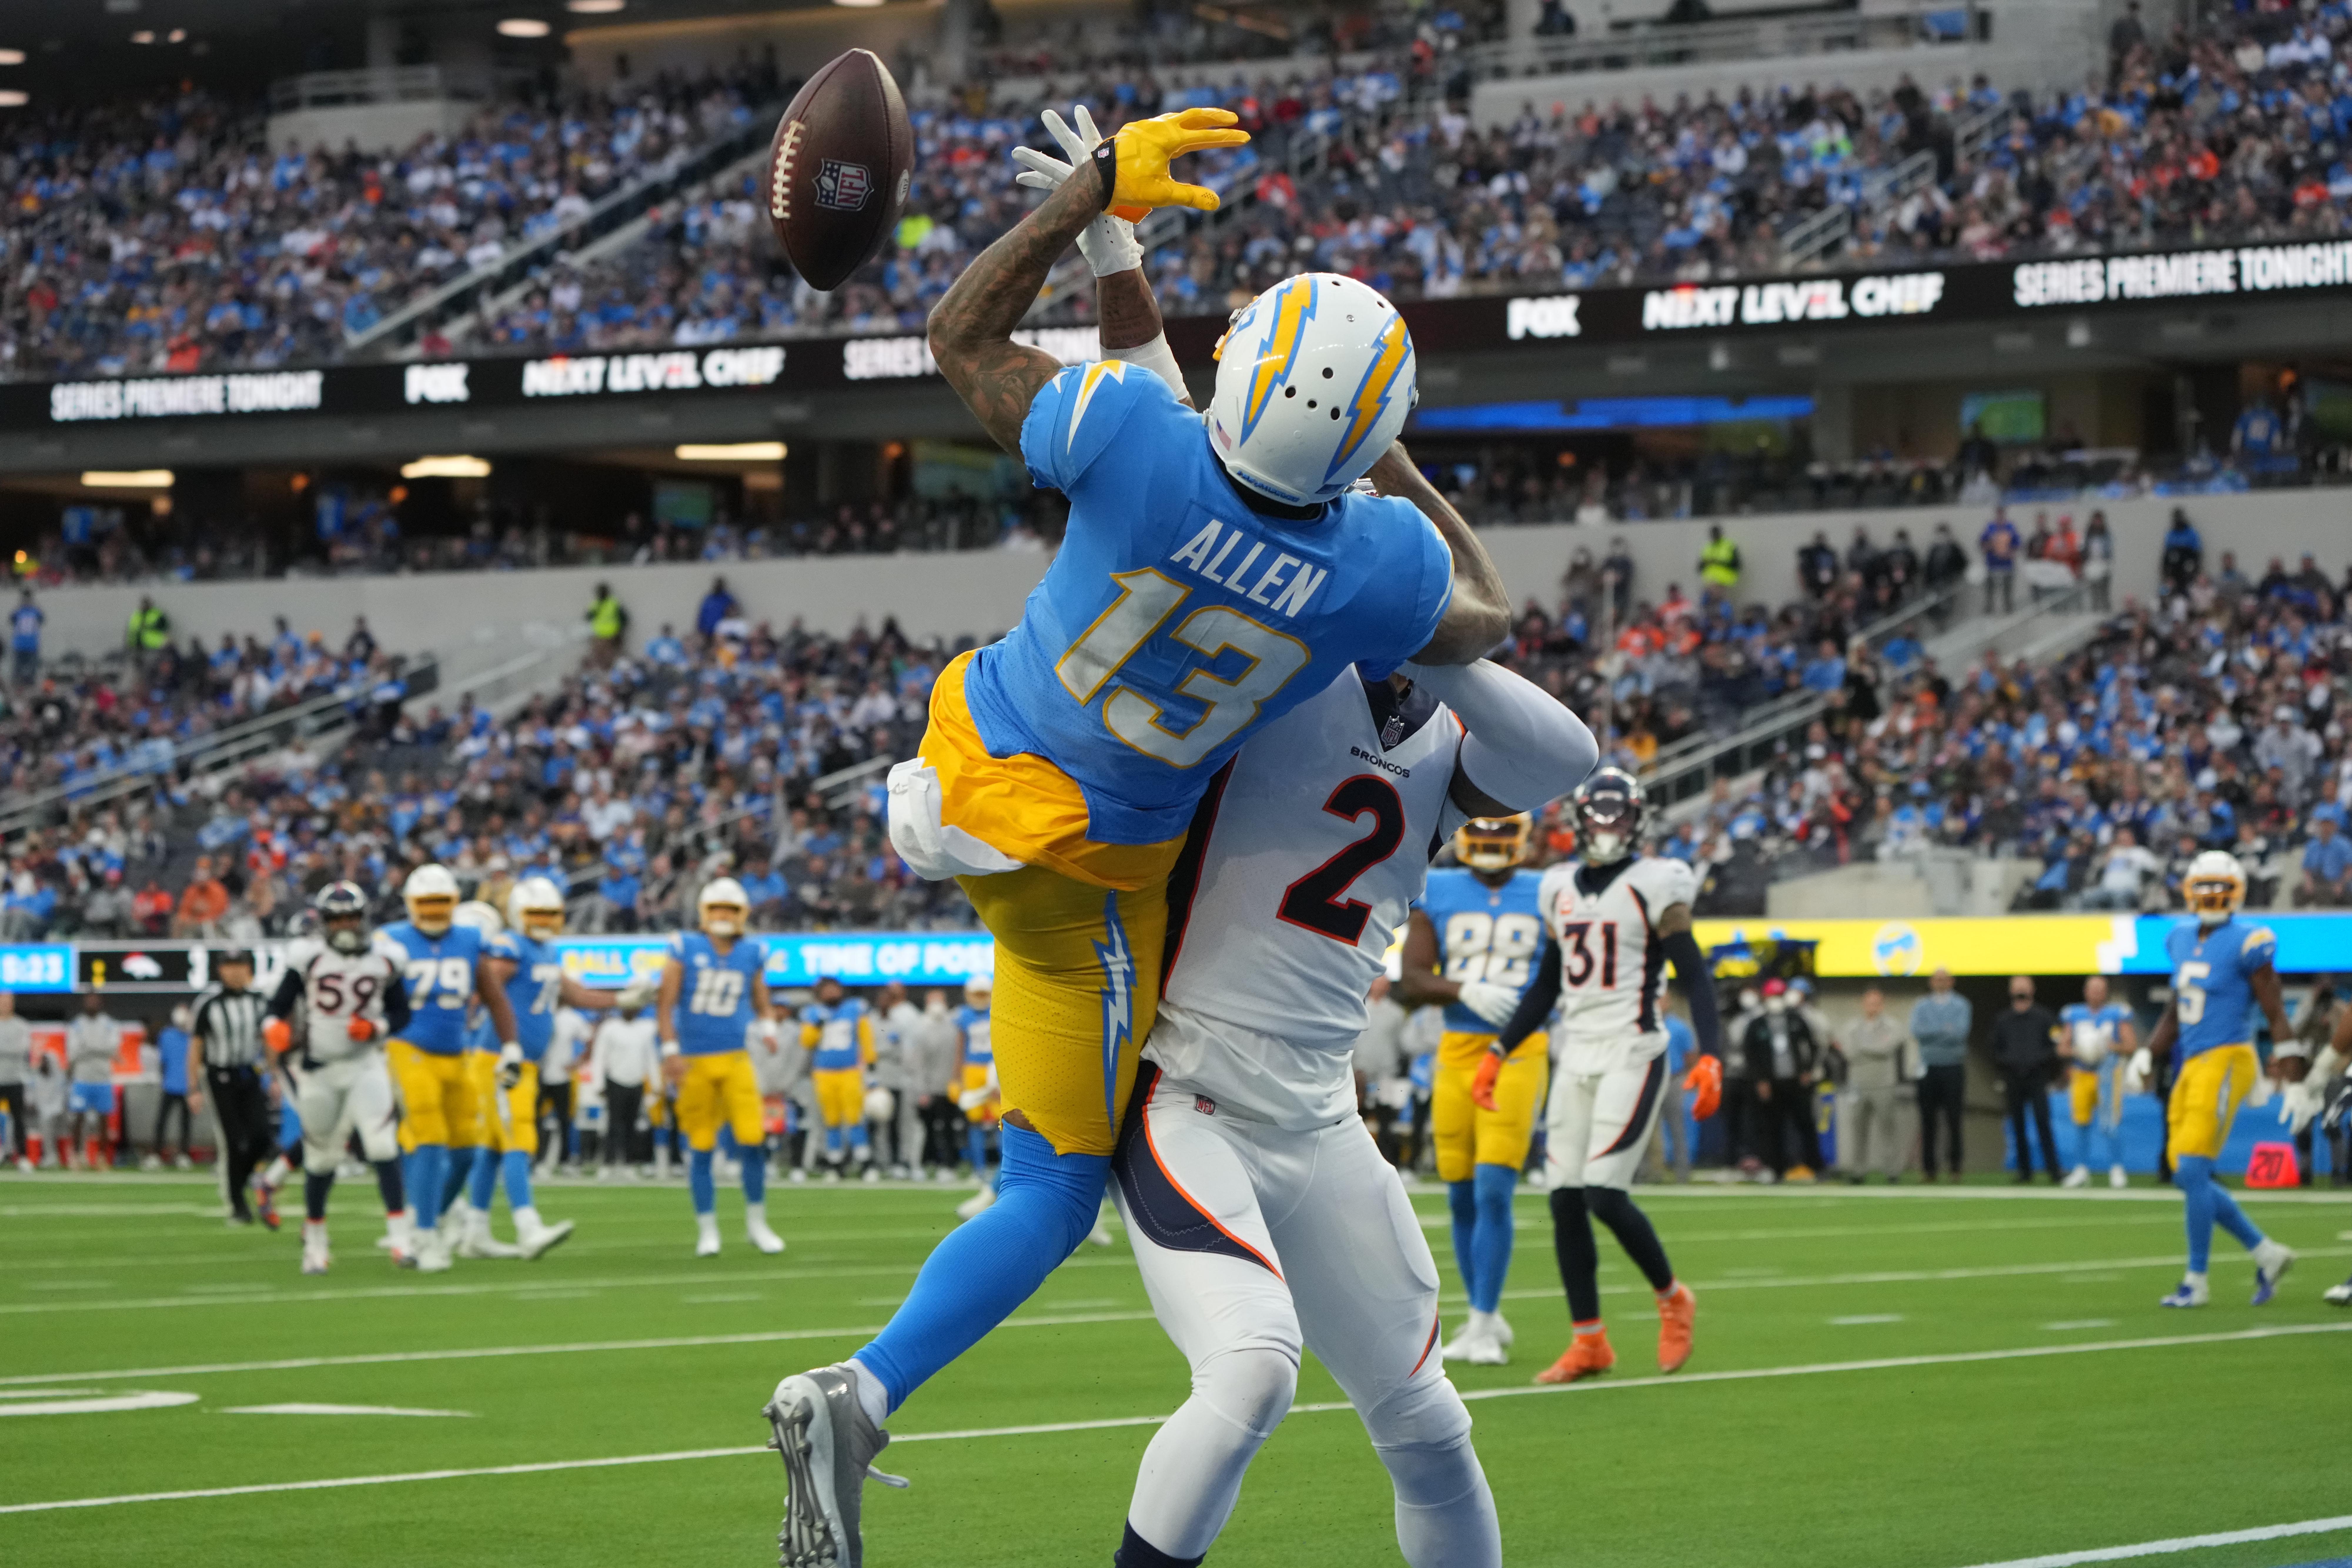 Denver Broncos cornerback Pat Surtain II (2) breaks up a pass intended for Los Angeles Chargers wide receiver Keenan Allen (13) in the second half at SoFi Stadium.